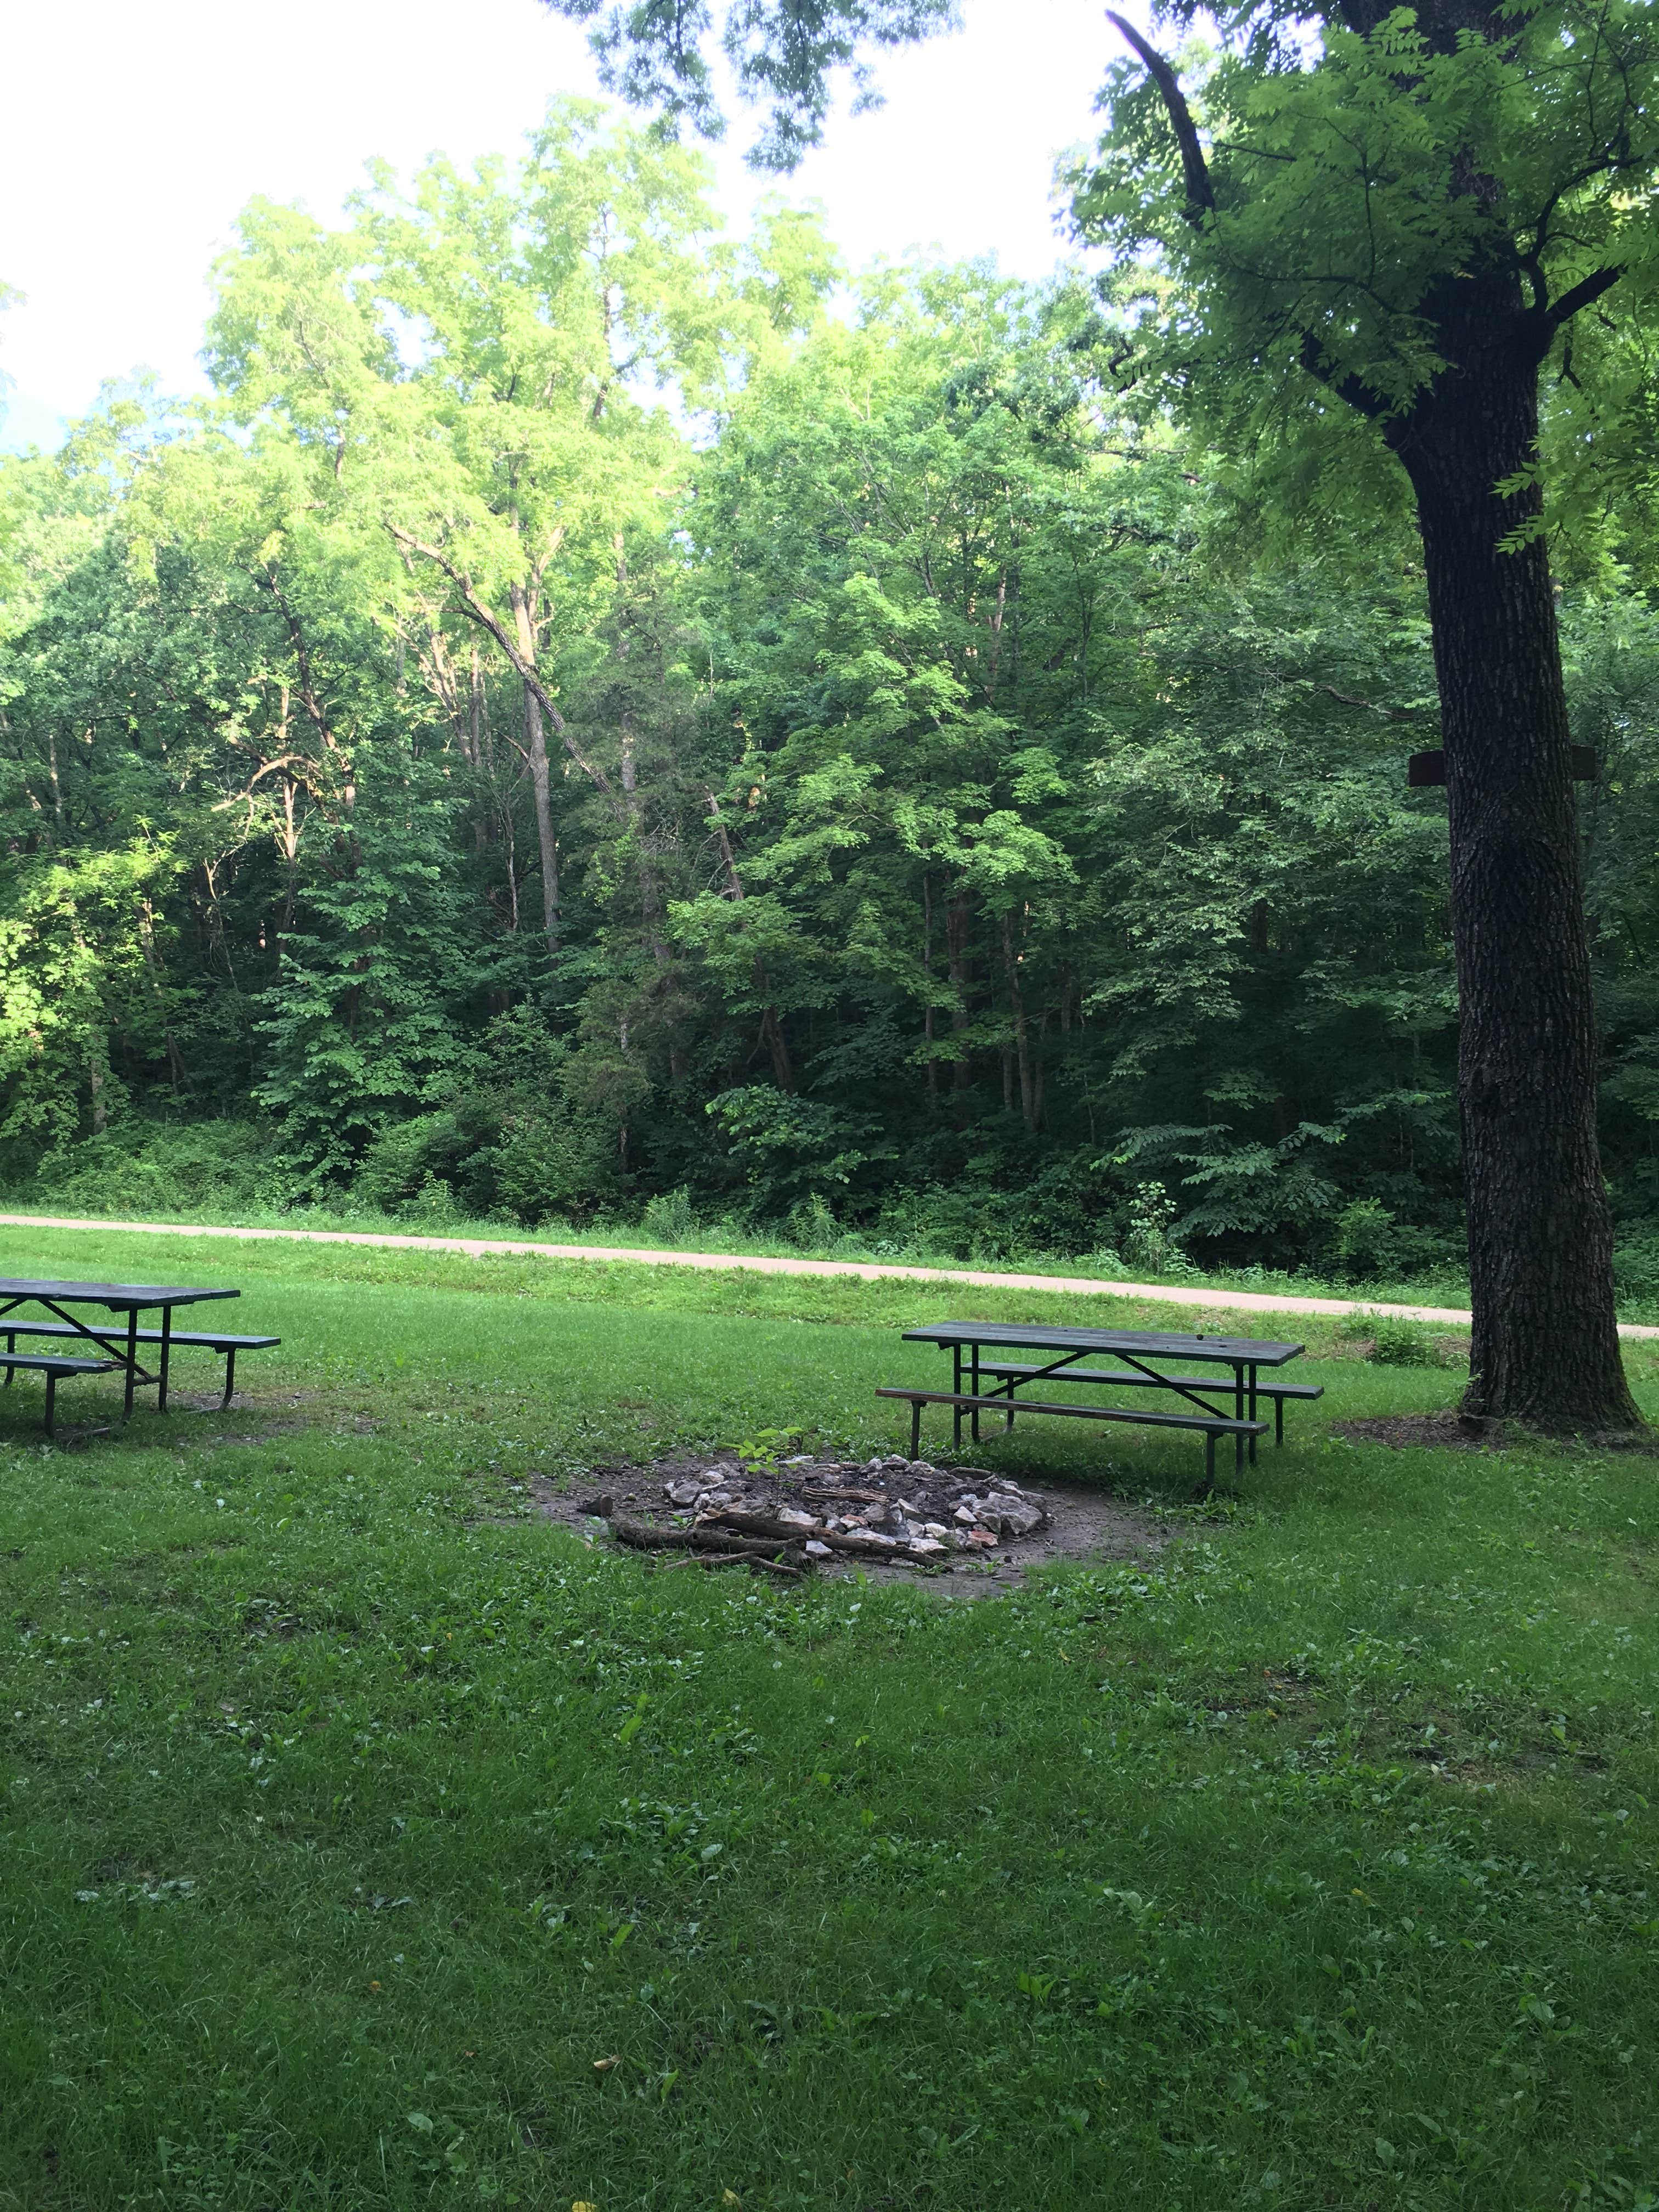 Picnic tables and fire pits in what I think is a group camping area